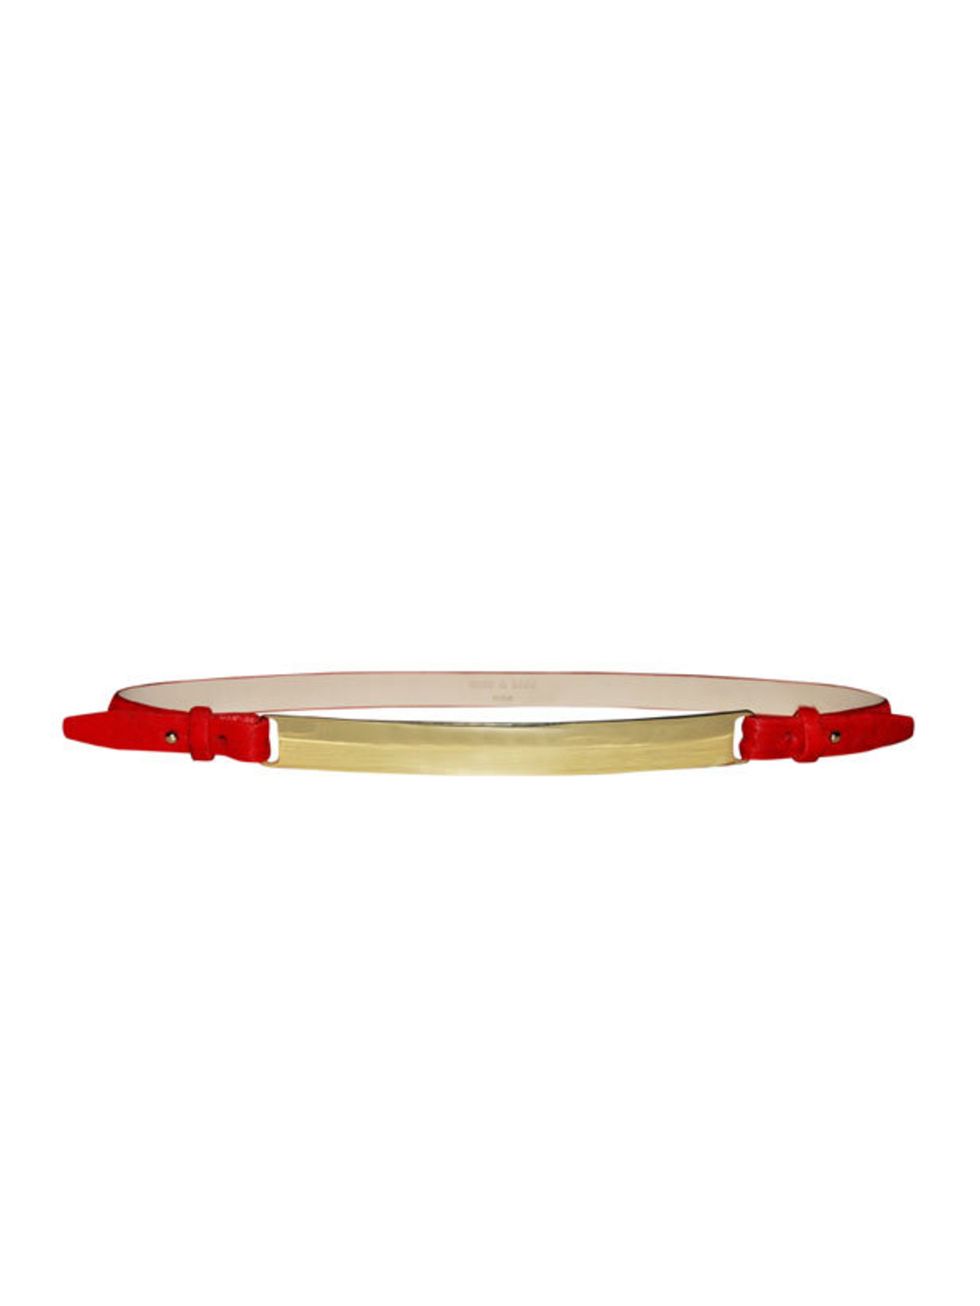 <p>Sass &amp; Bide 'Truth be Told' belt, £180, at <a href="http://www.glassworks-studios.com/product/sbi10043/">Glassworks Studios</a></p>